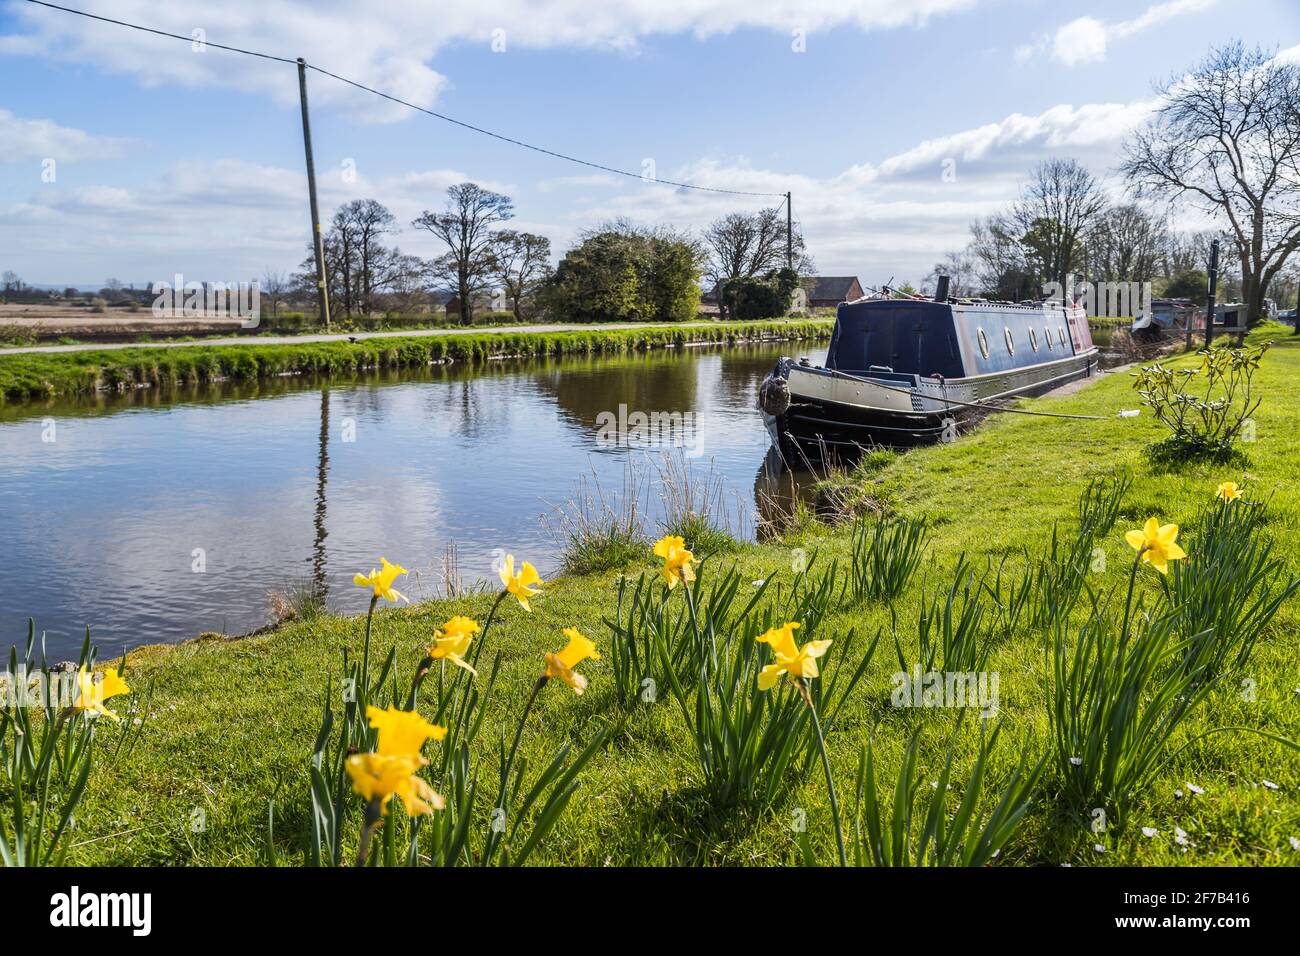 Pretty yellow daffodils in full bloom next to a narrow boat the Leeds Liverpool Canal near Burscough, Lancashire in April 2021. Stock Photo